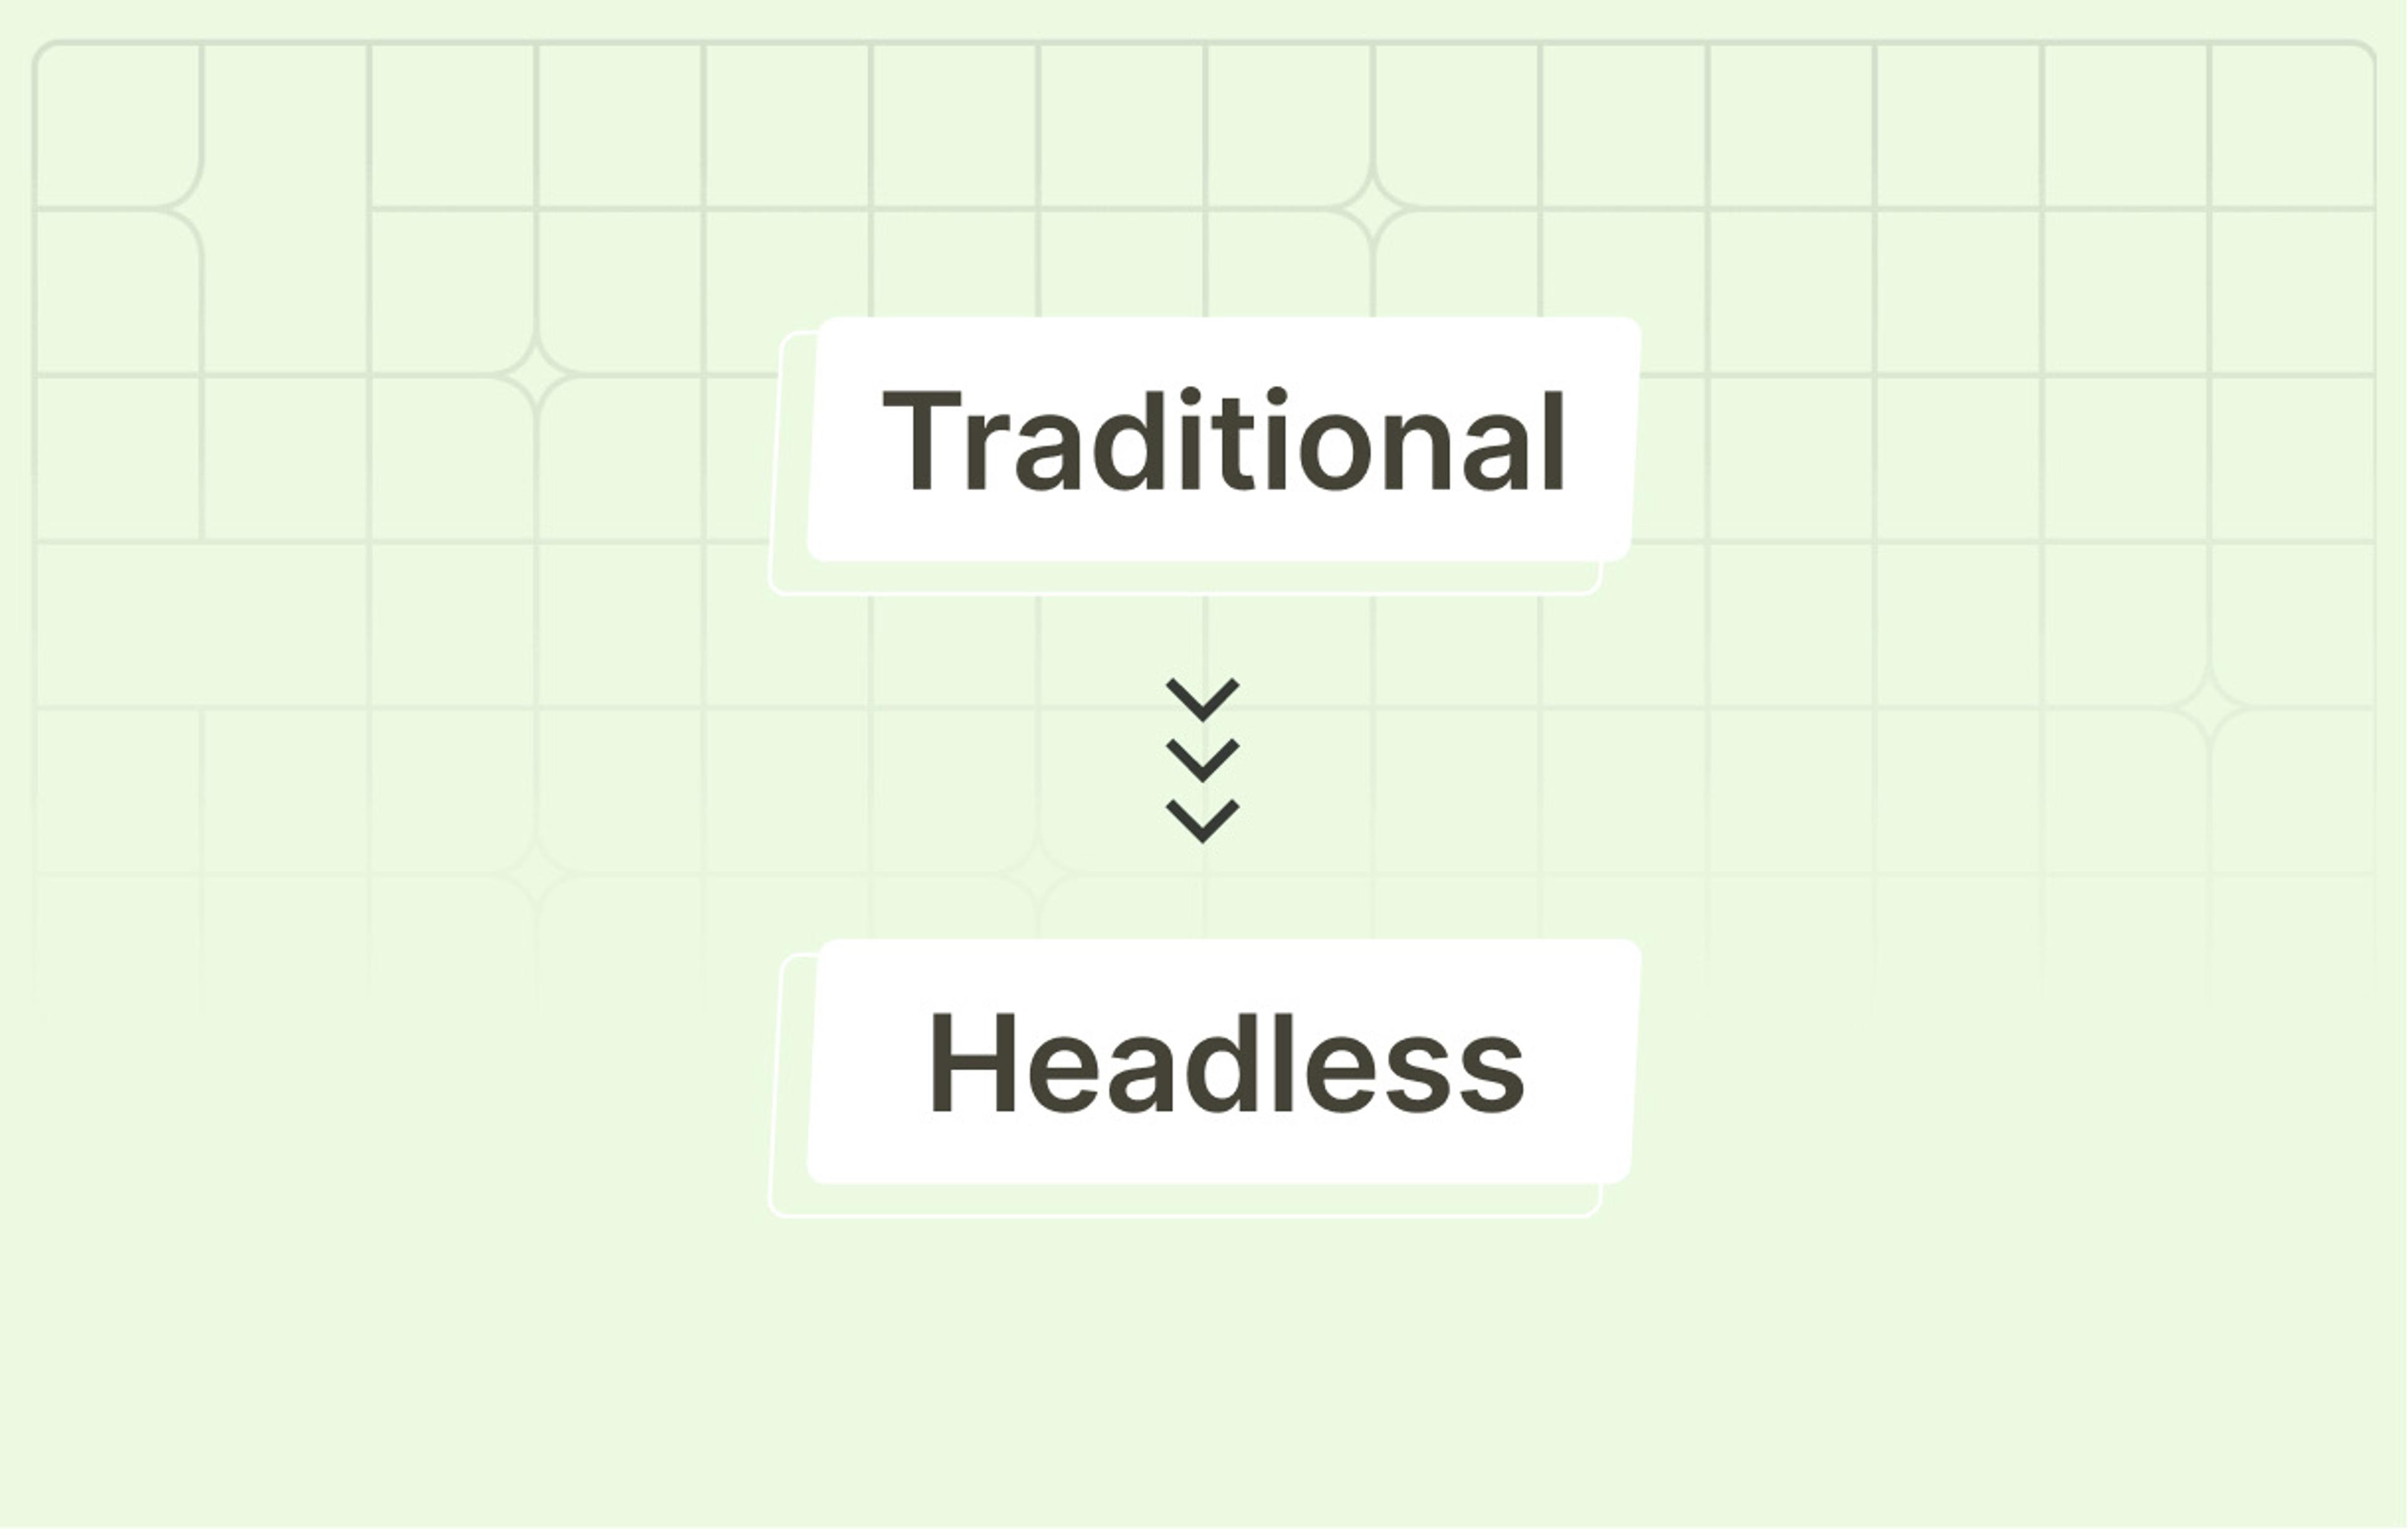 Moving brands from traditional commerce to headless.